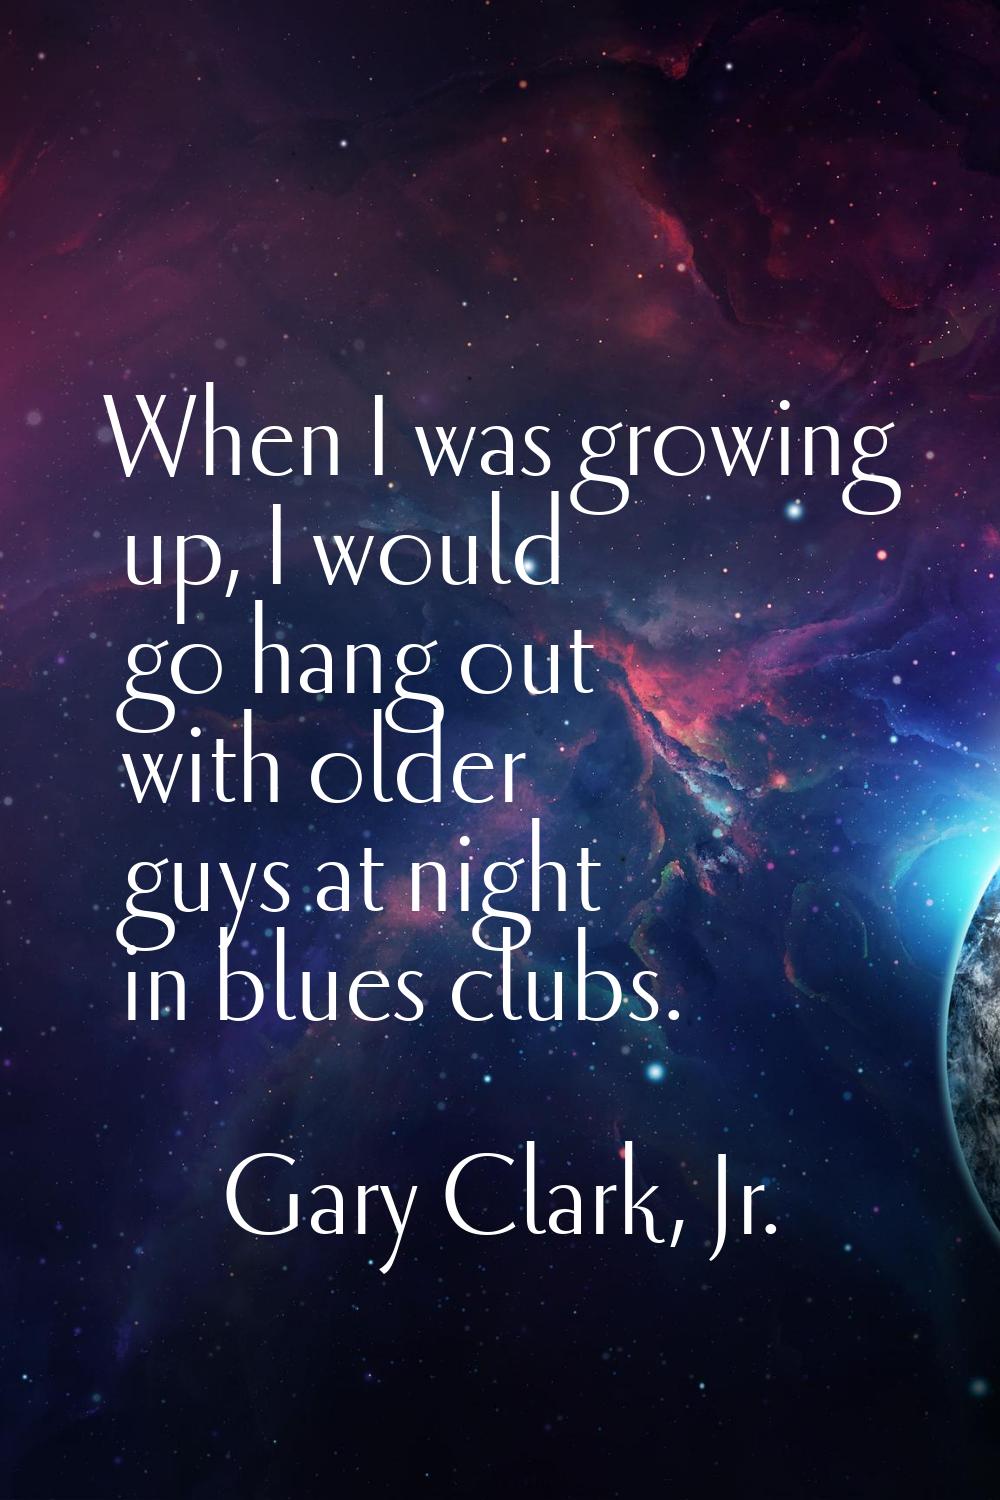 When I was growing up, I would go hang out with older guys at night in blues clubs.